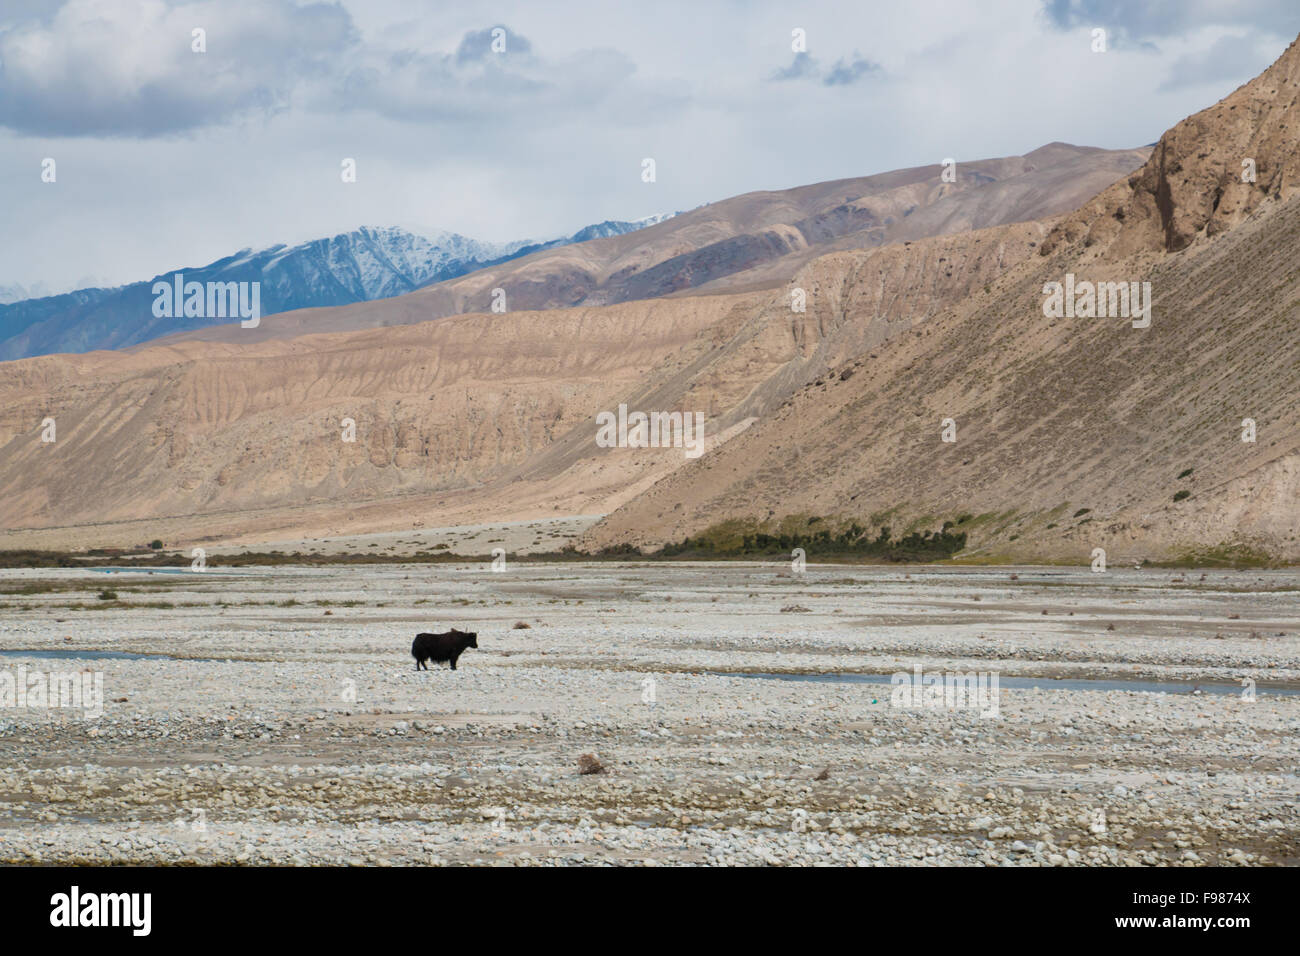 Single cow standing in vast mountain landscape Stock Photo